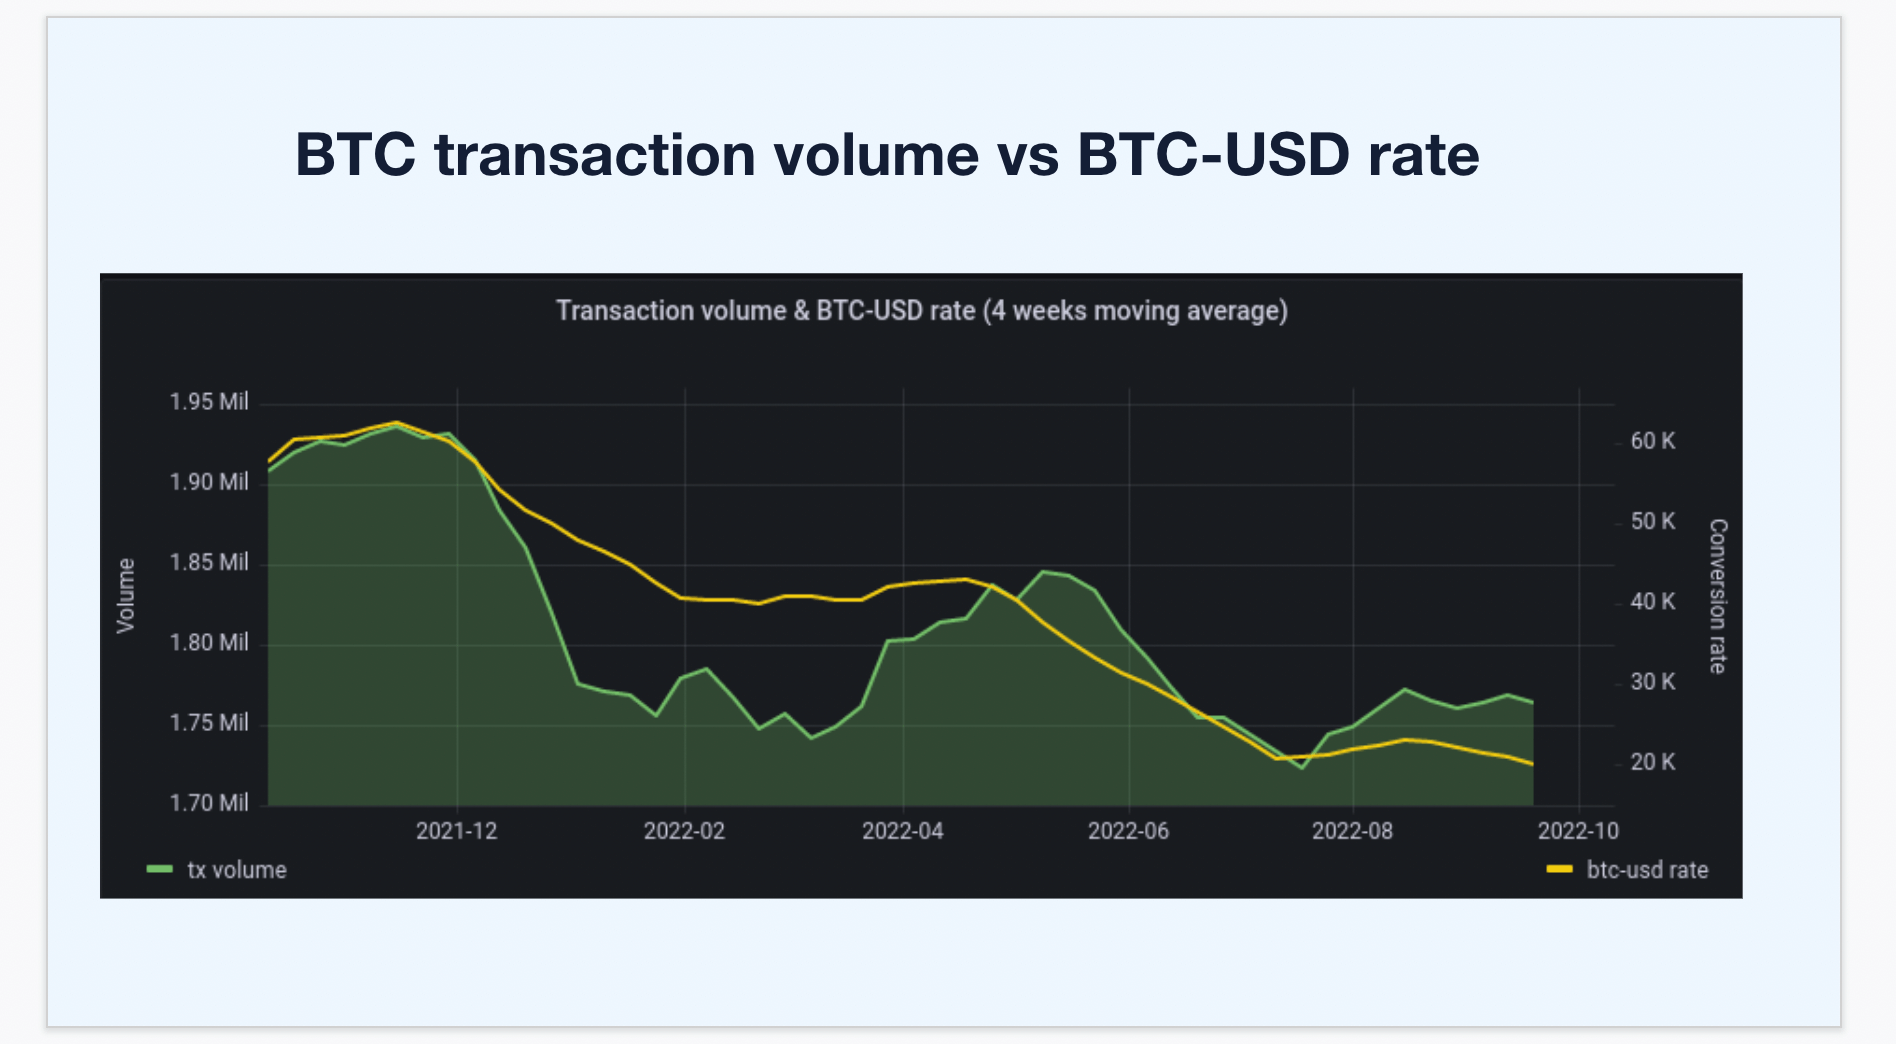 A line graph showing the transaction volume and BTC USD rate